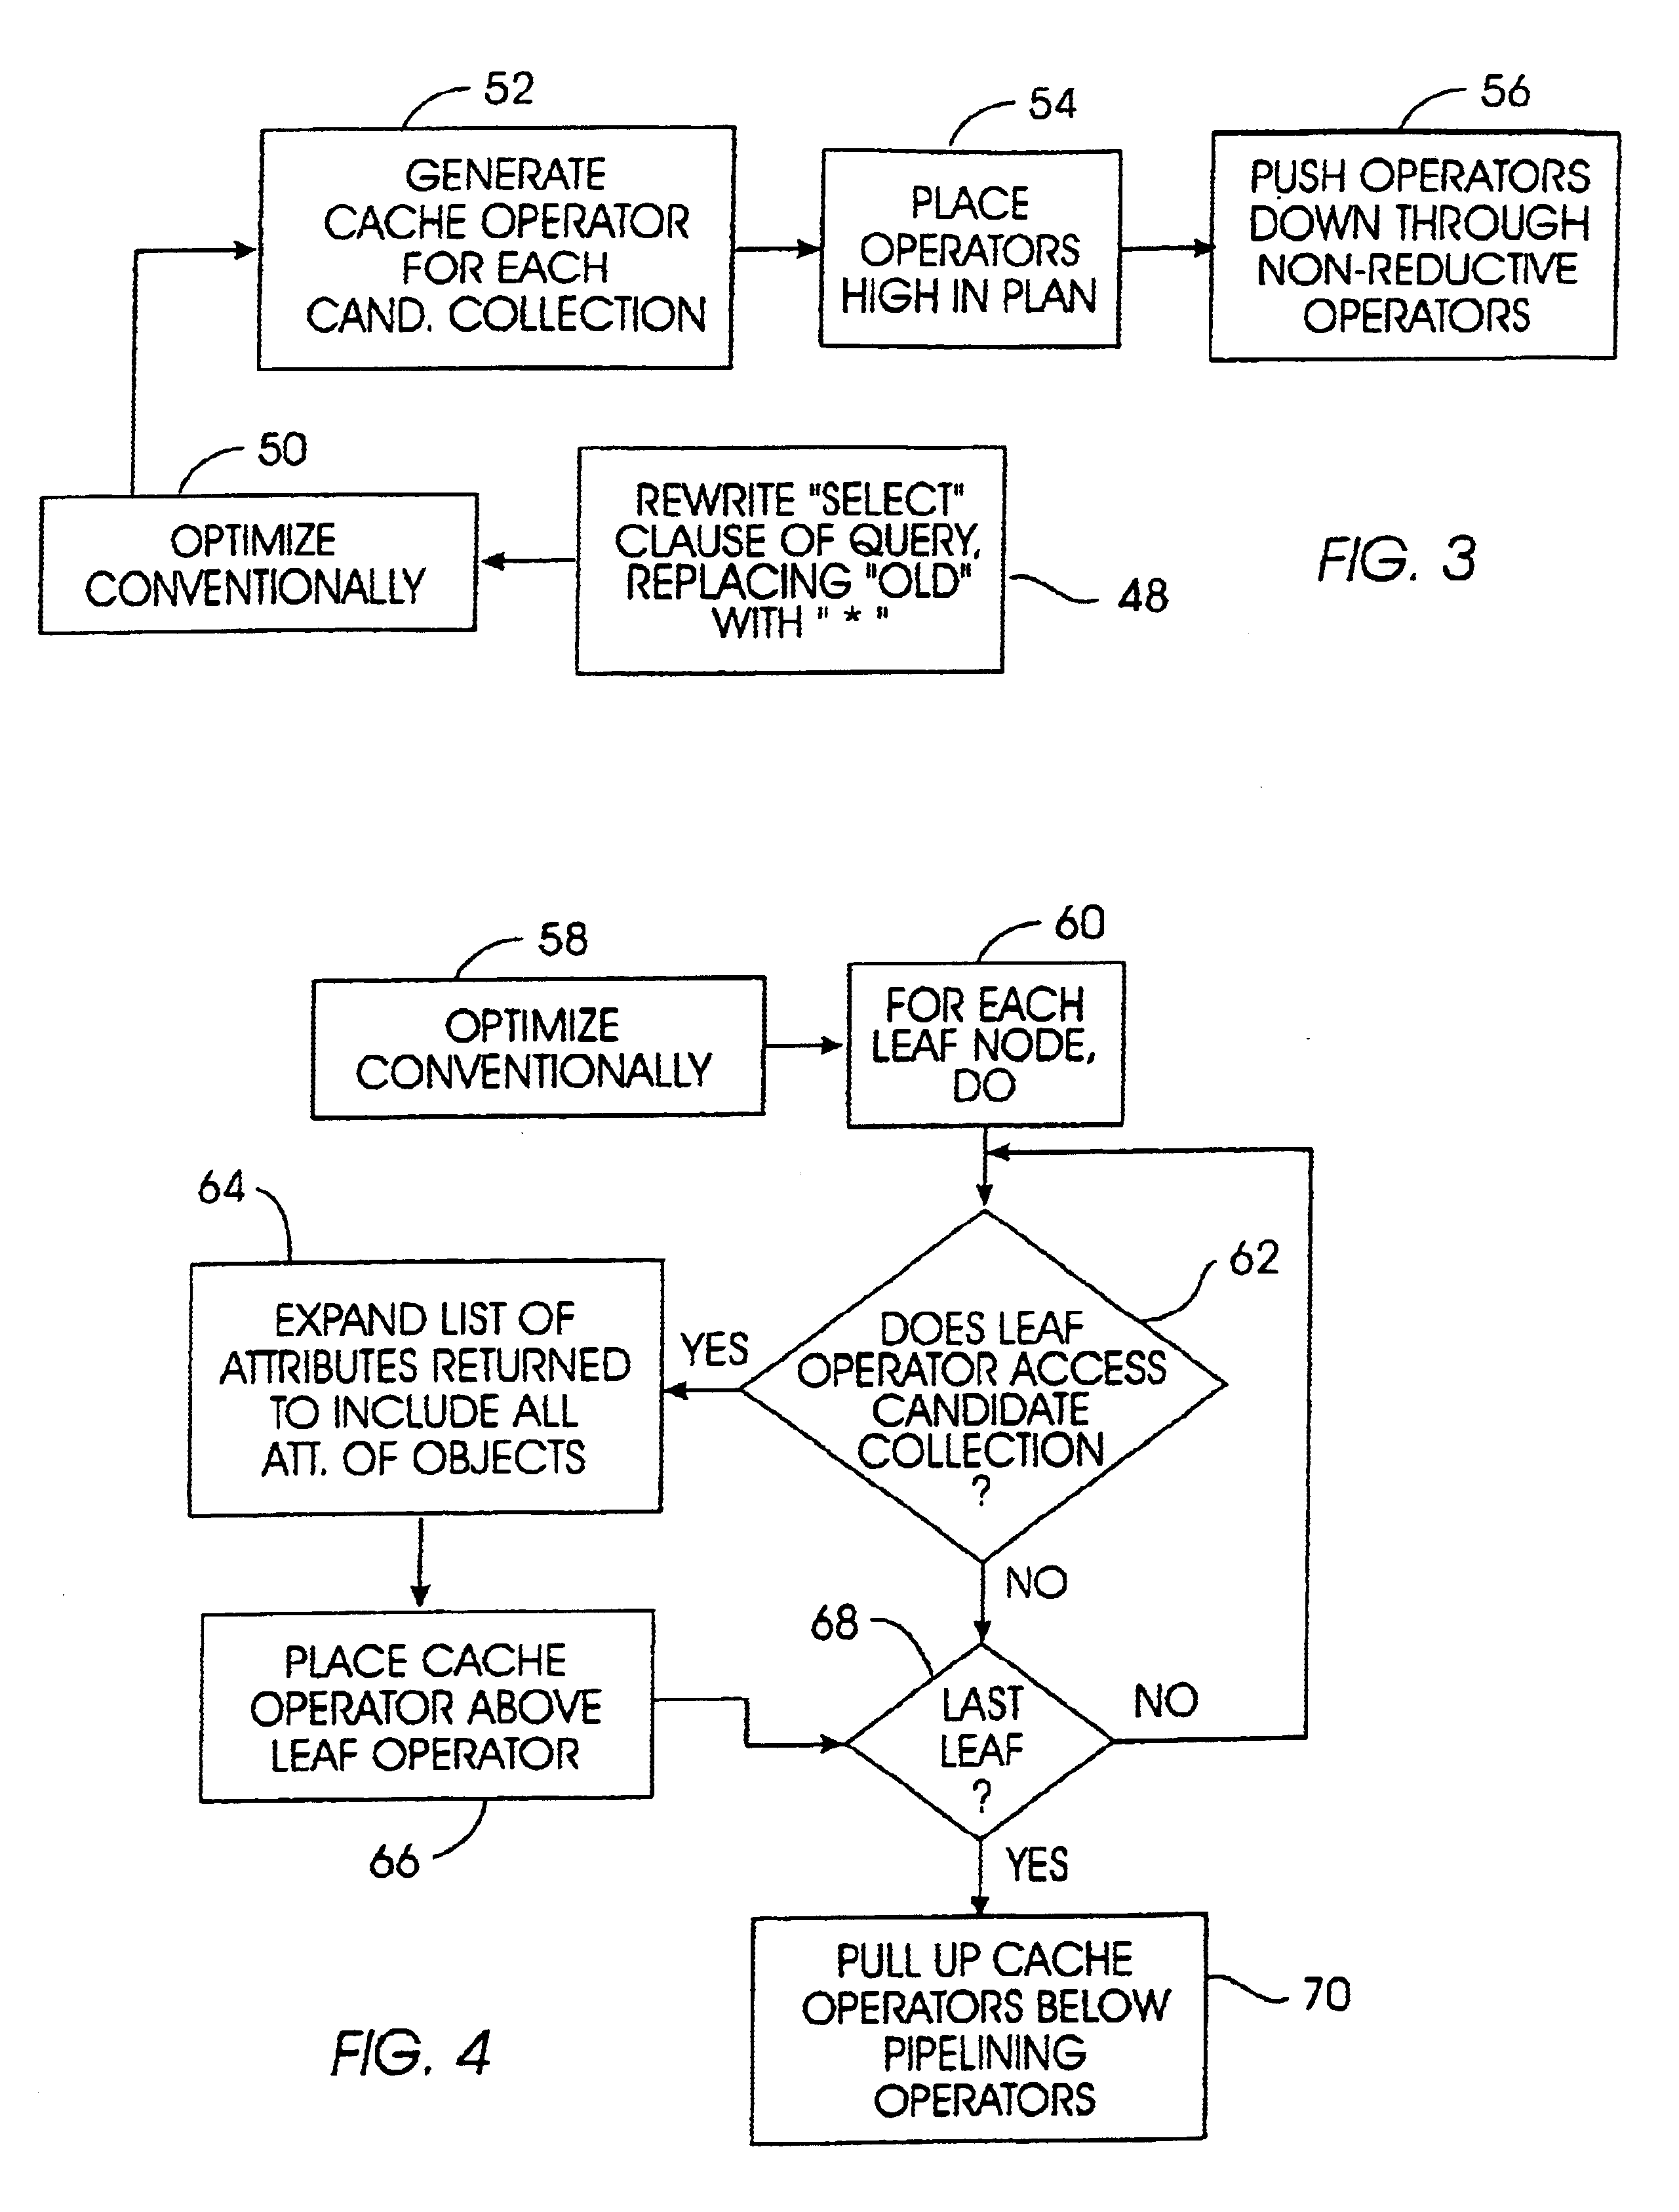 System and method for loading a cache with query results